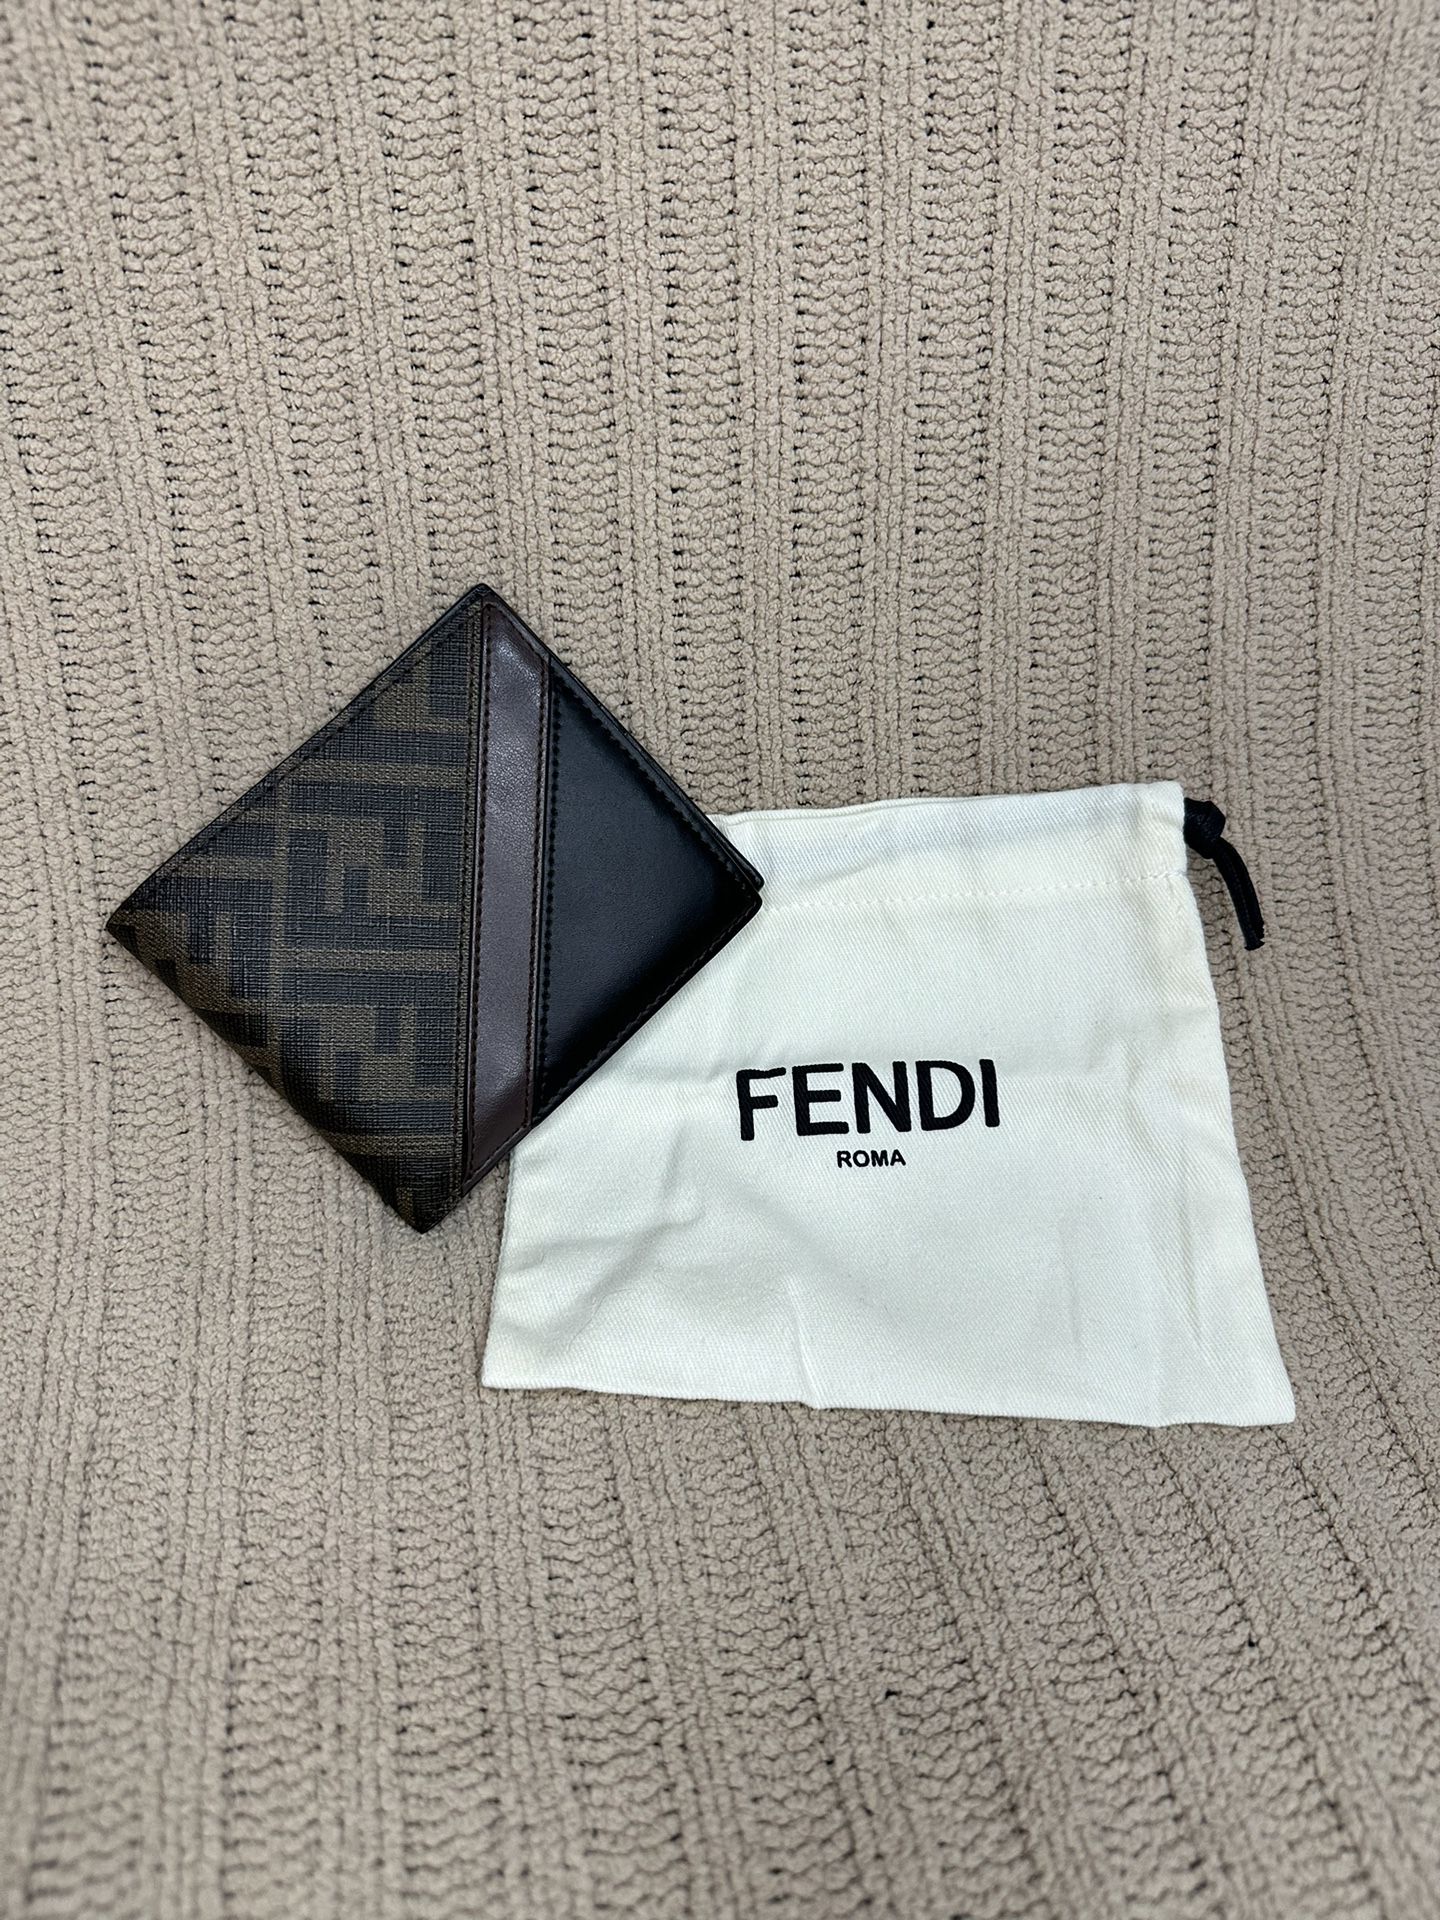 FENDI DIAGONAL BI-FOLD WALLET BROWN FABRIC FF ROMA MADE IN ITALY DUST BAG INCLUDED